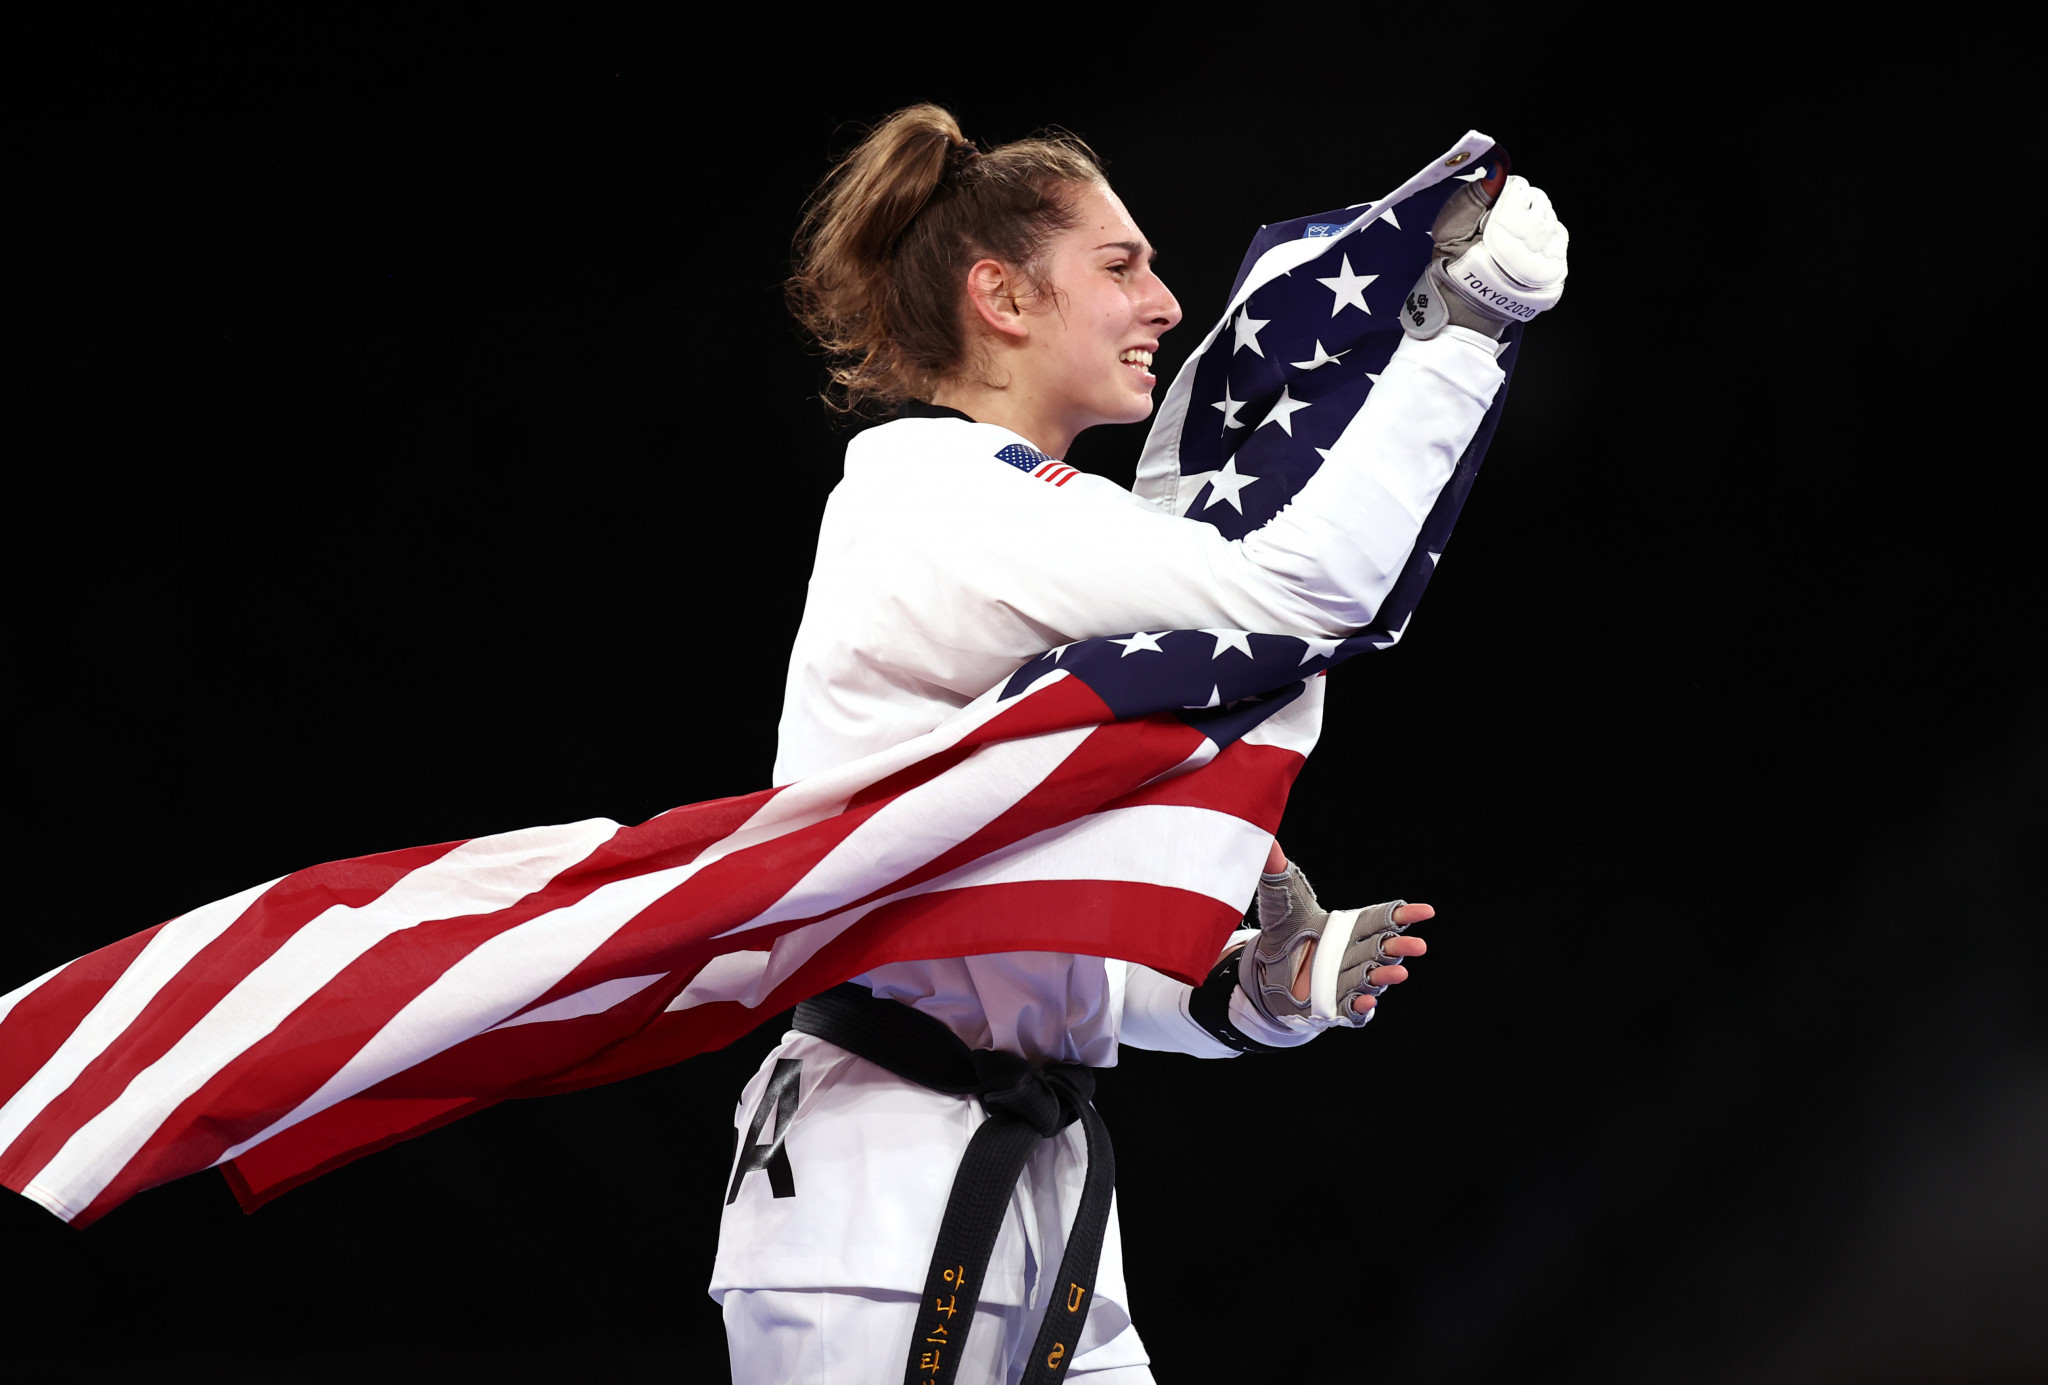 The US has won three golds, including Anastasija Zolotic at Tokyo 2020, two silvers and five bronzes to sit third on taekwondo's all-time Olympic medals table ©Getty Images